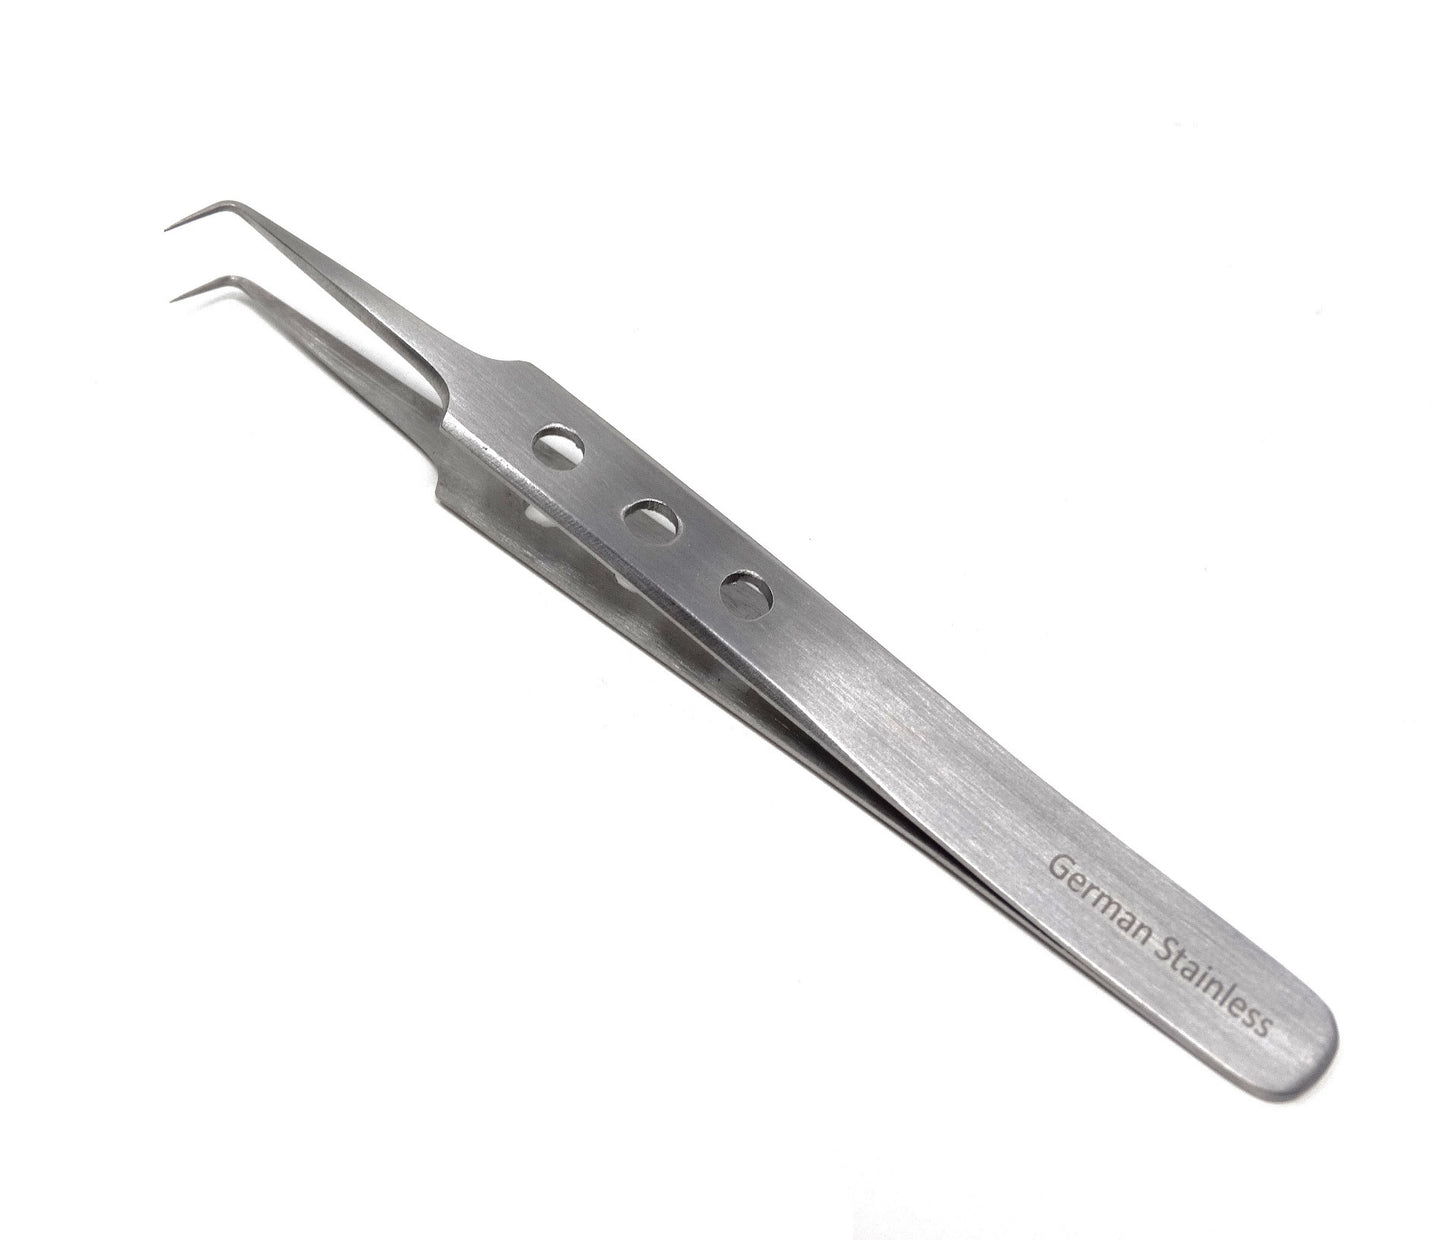 Stainless Steel Micro Surgical Forceps Tweezers X Type Right Angle 90 Degree, Self Retracting, Fenestrated Handle, Premium Quality